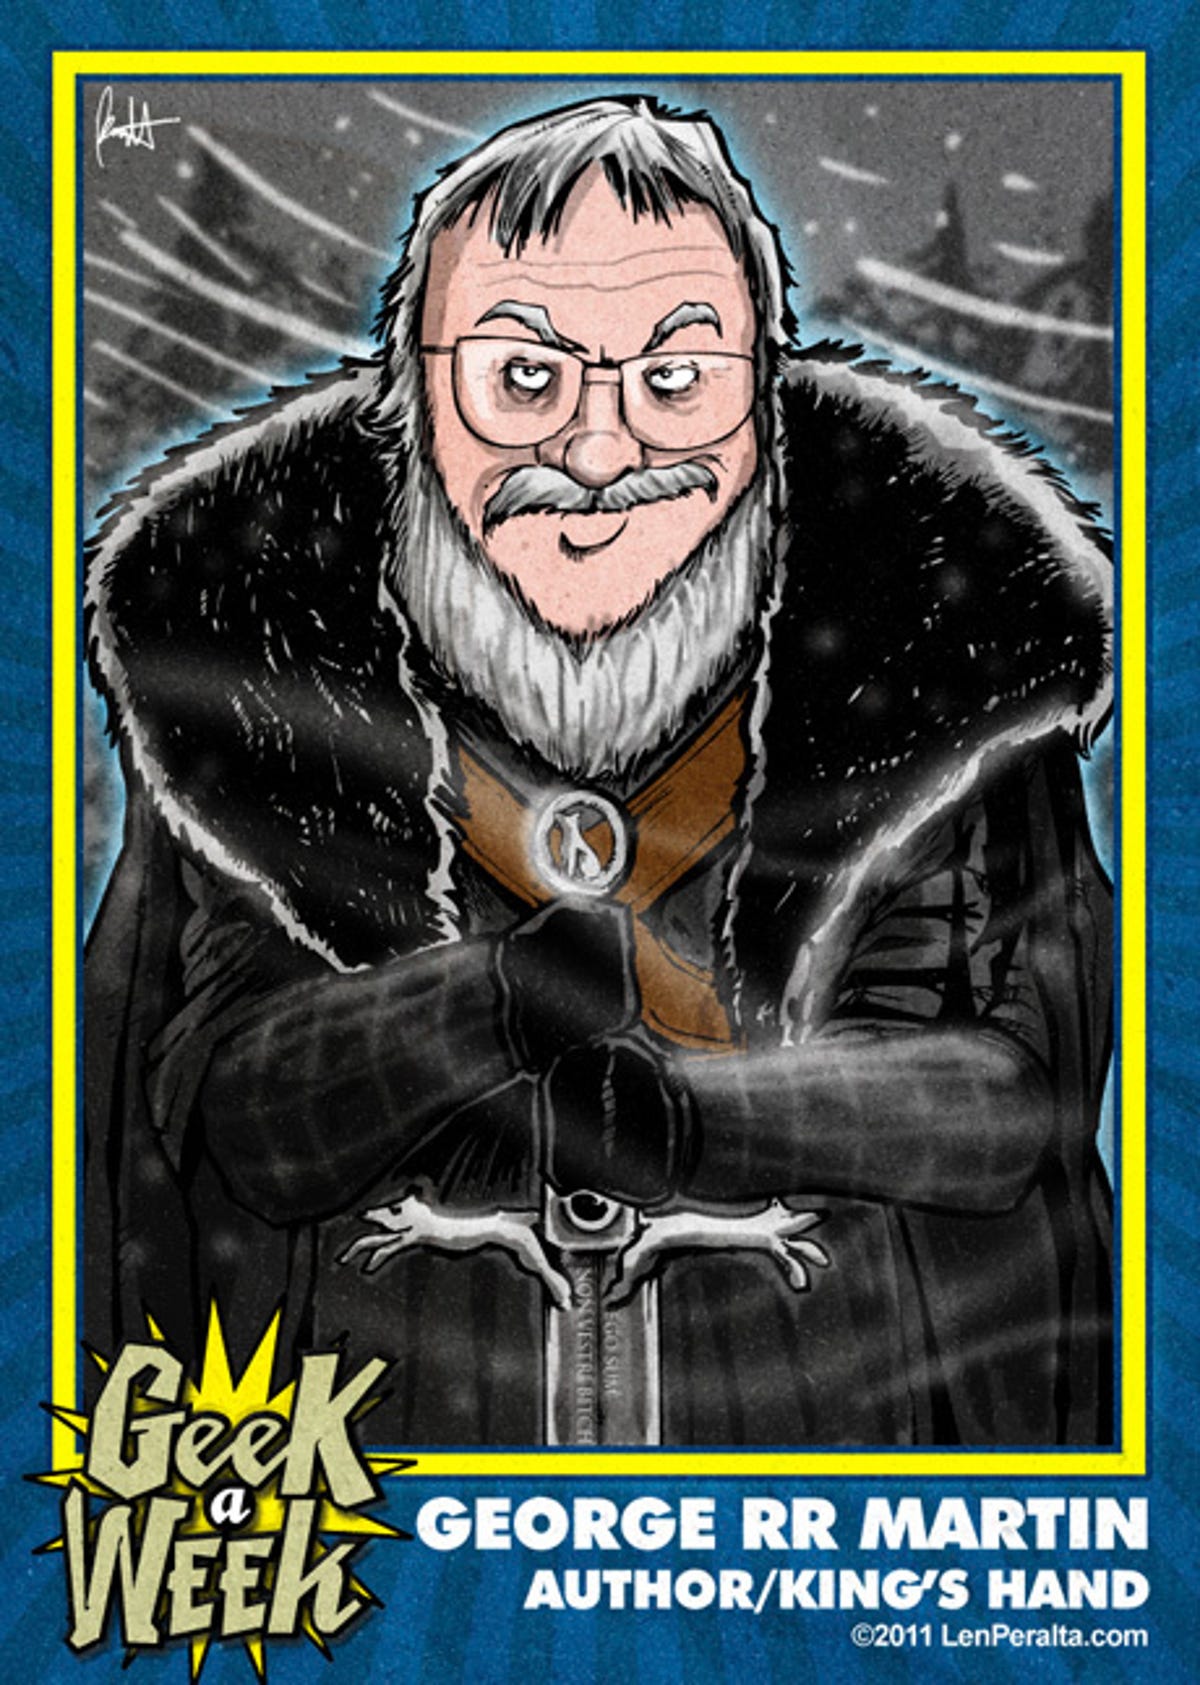 "Game of Thrones" author George RR Martin is one of the many well-known celebs featured in past Geek-A-Week trading card sets.